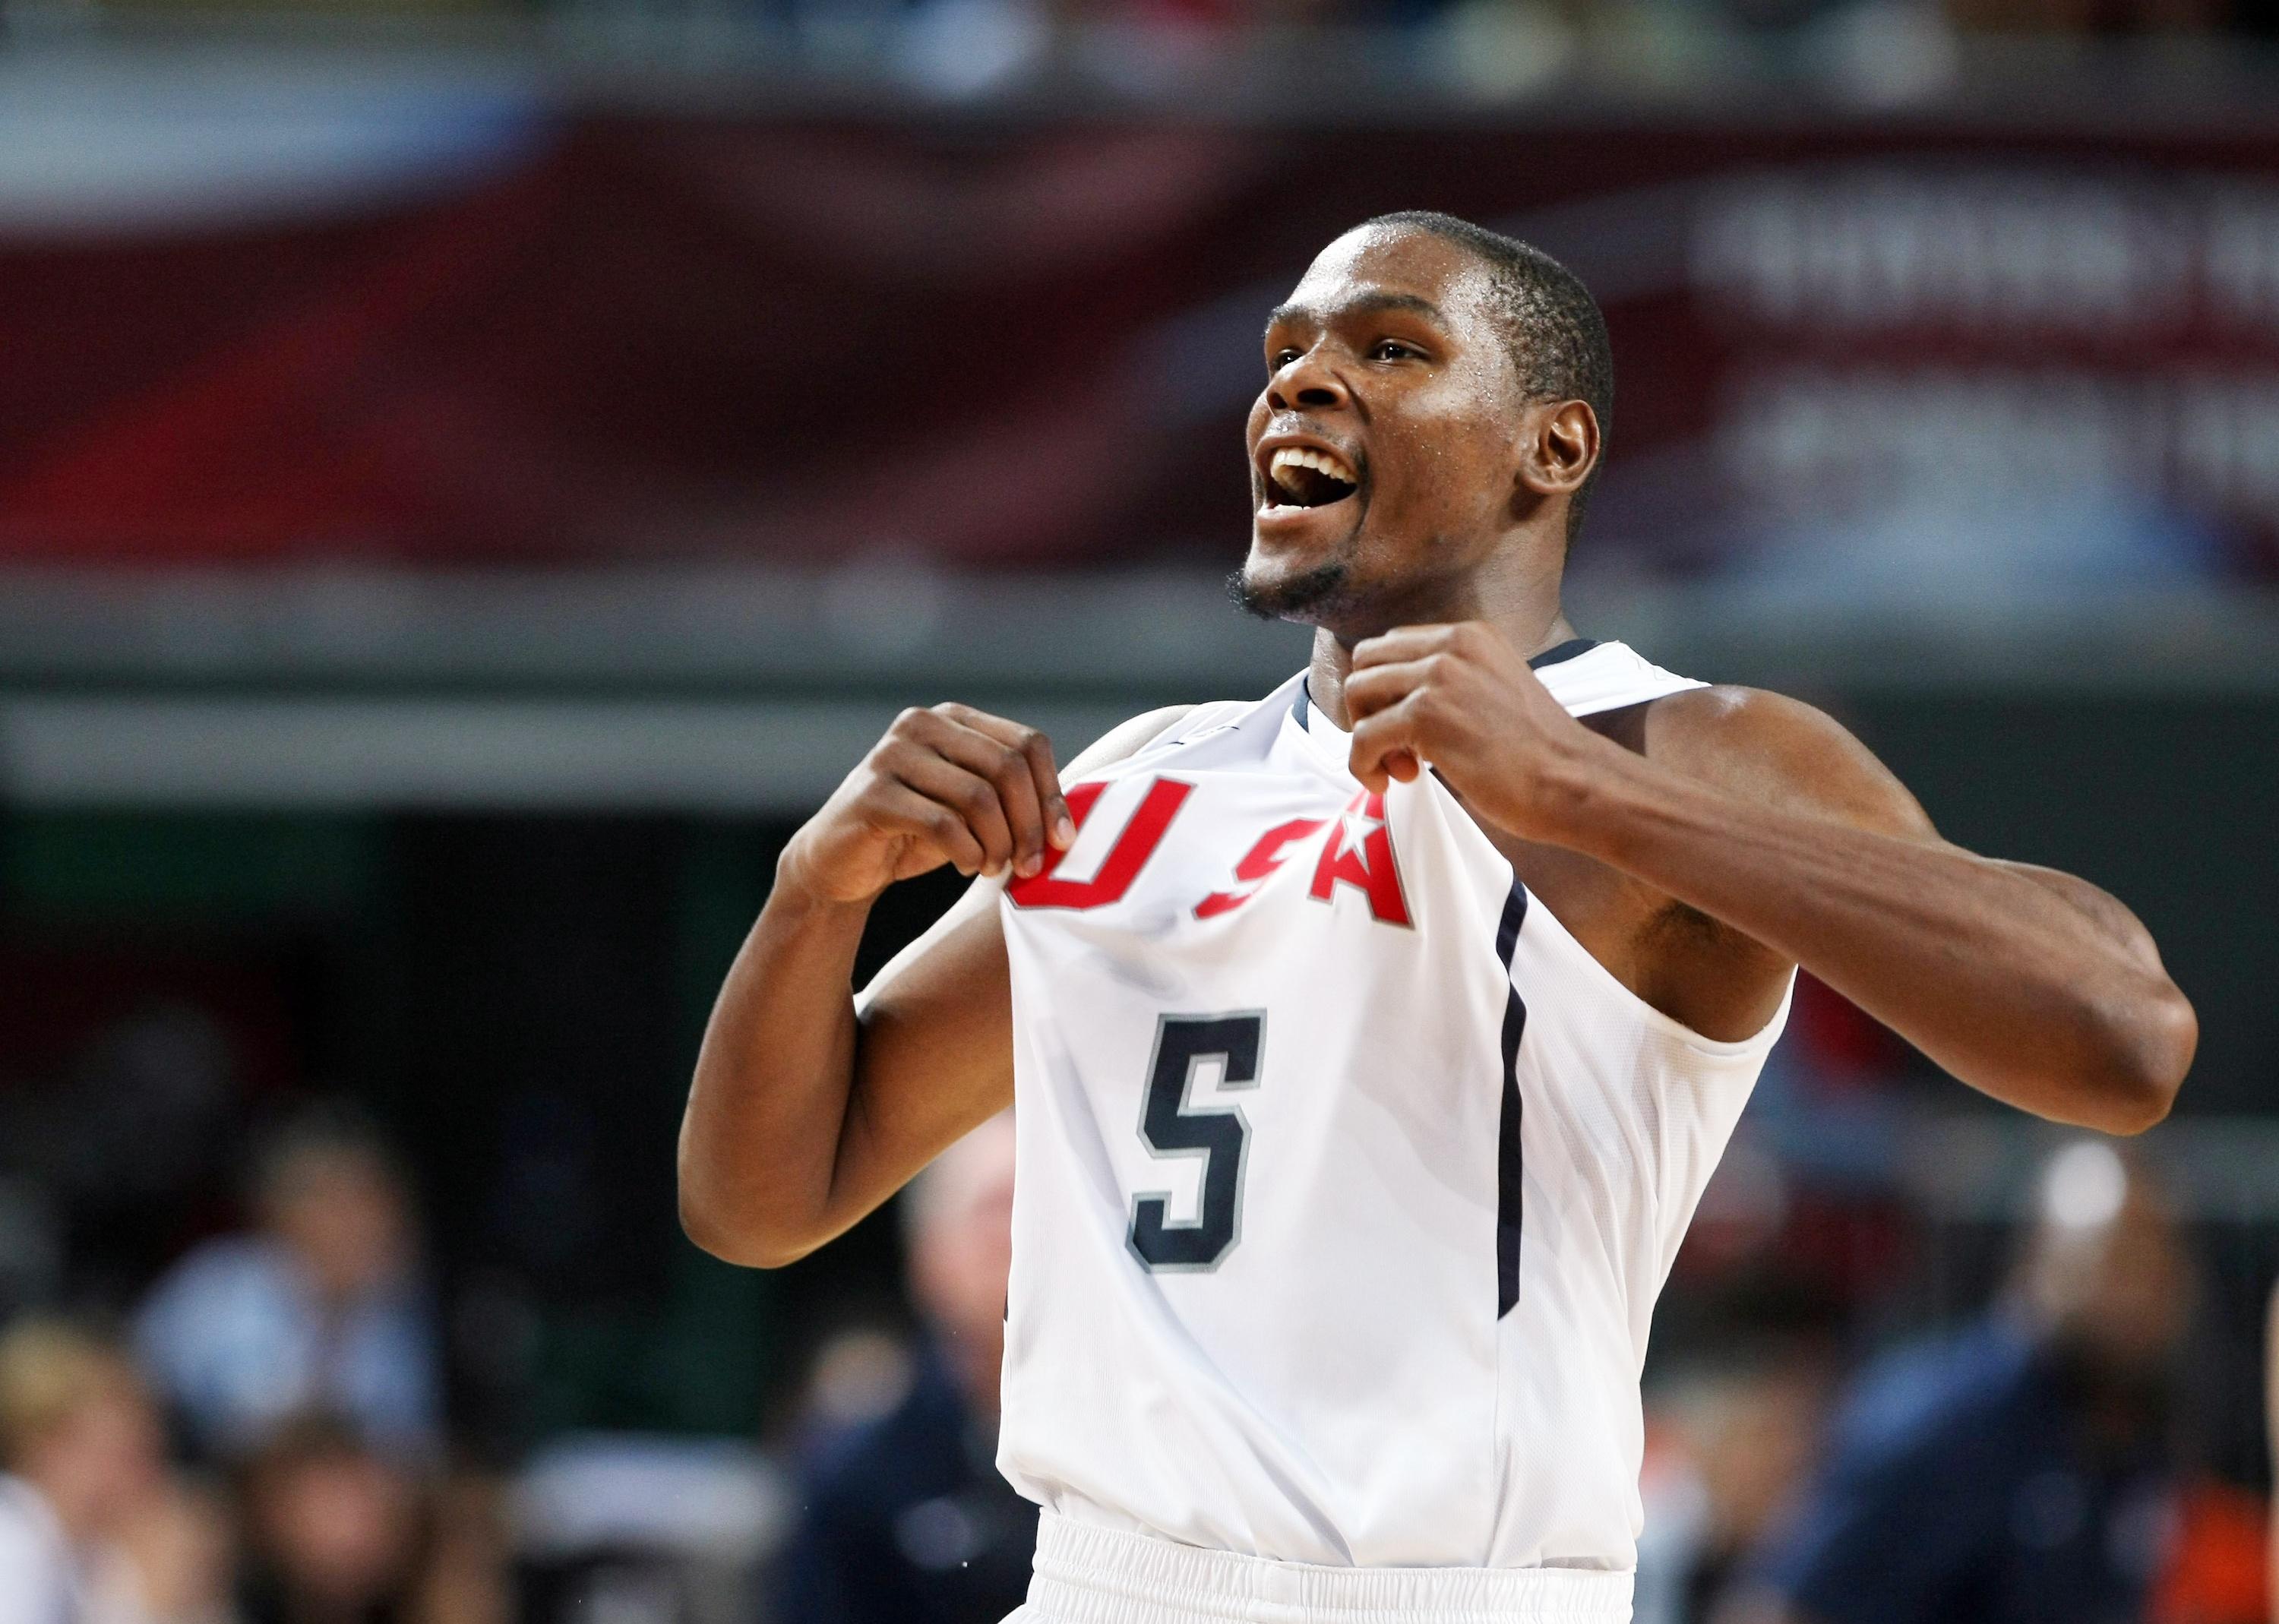 Kevin Durant in action at the 2010 World Championships of Basketball during the game between USA vs Lithuania.